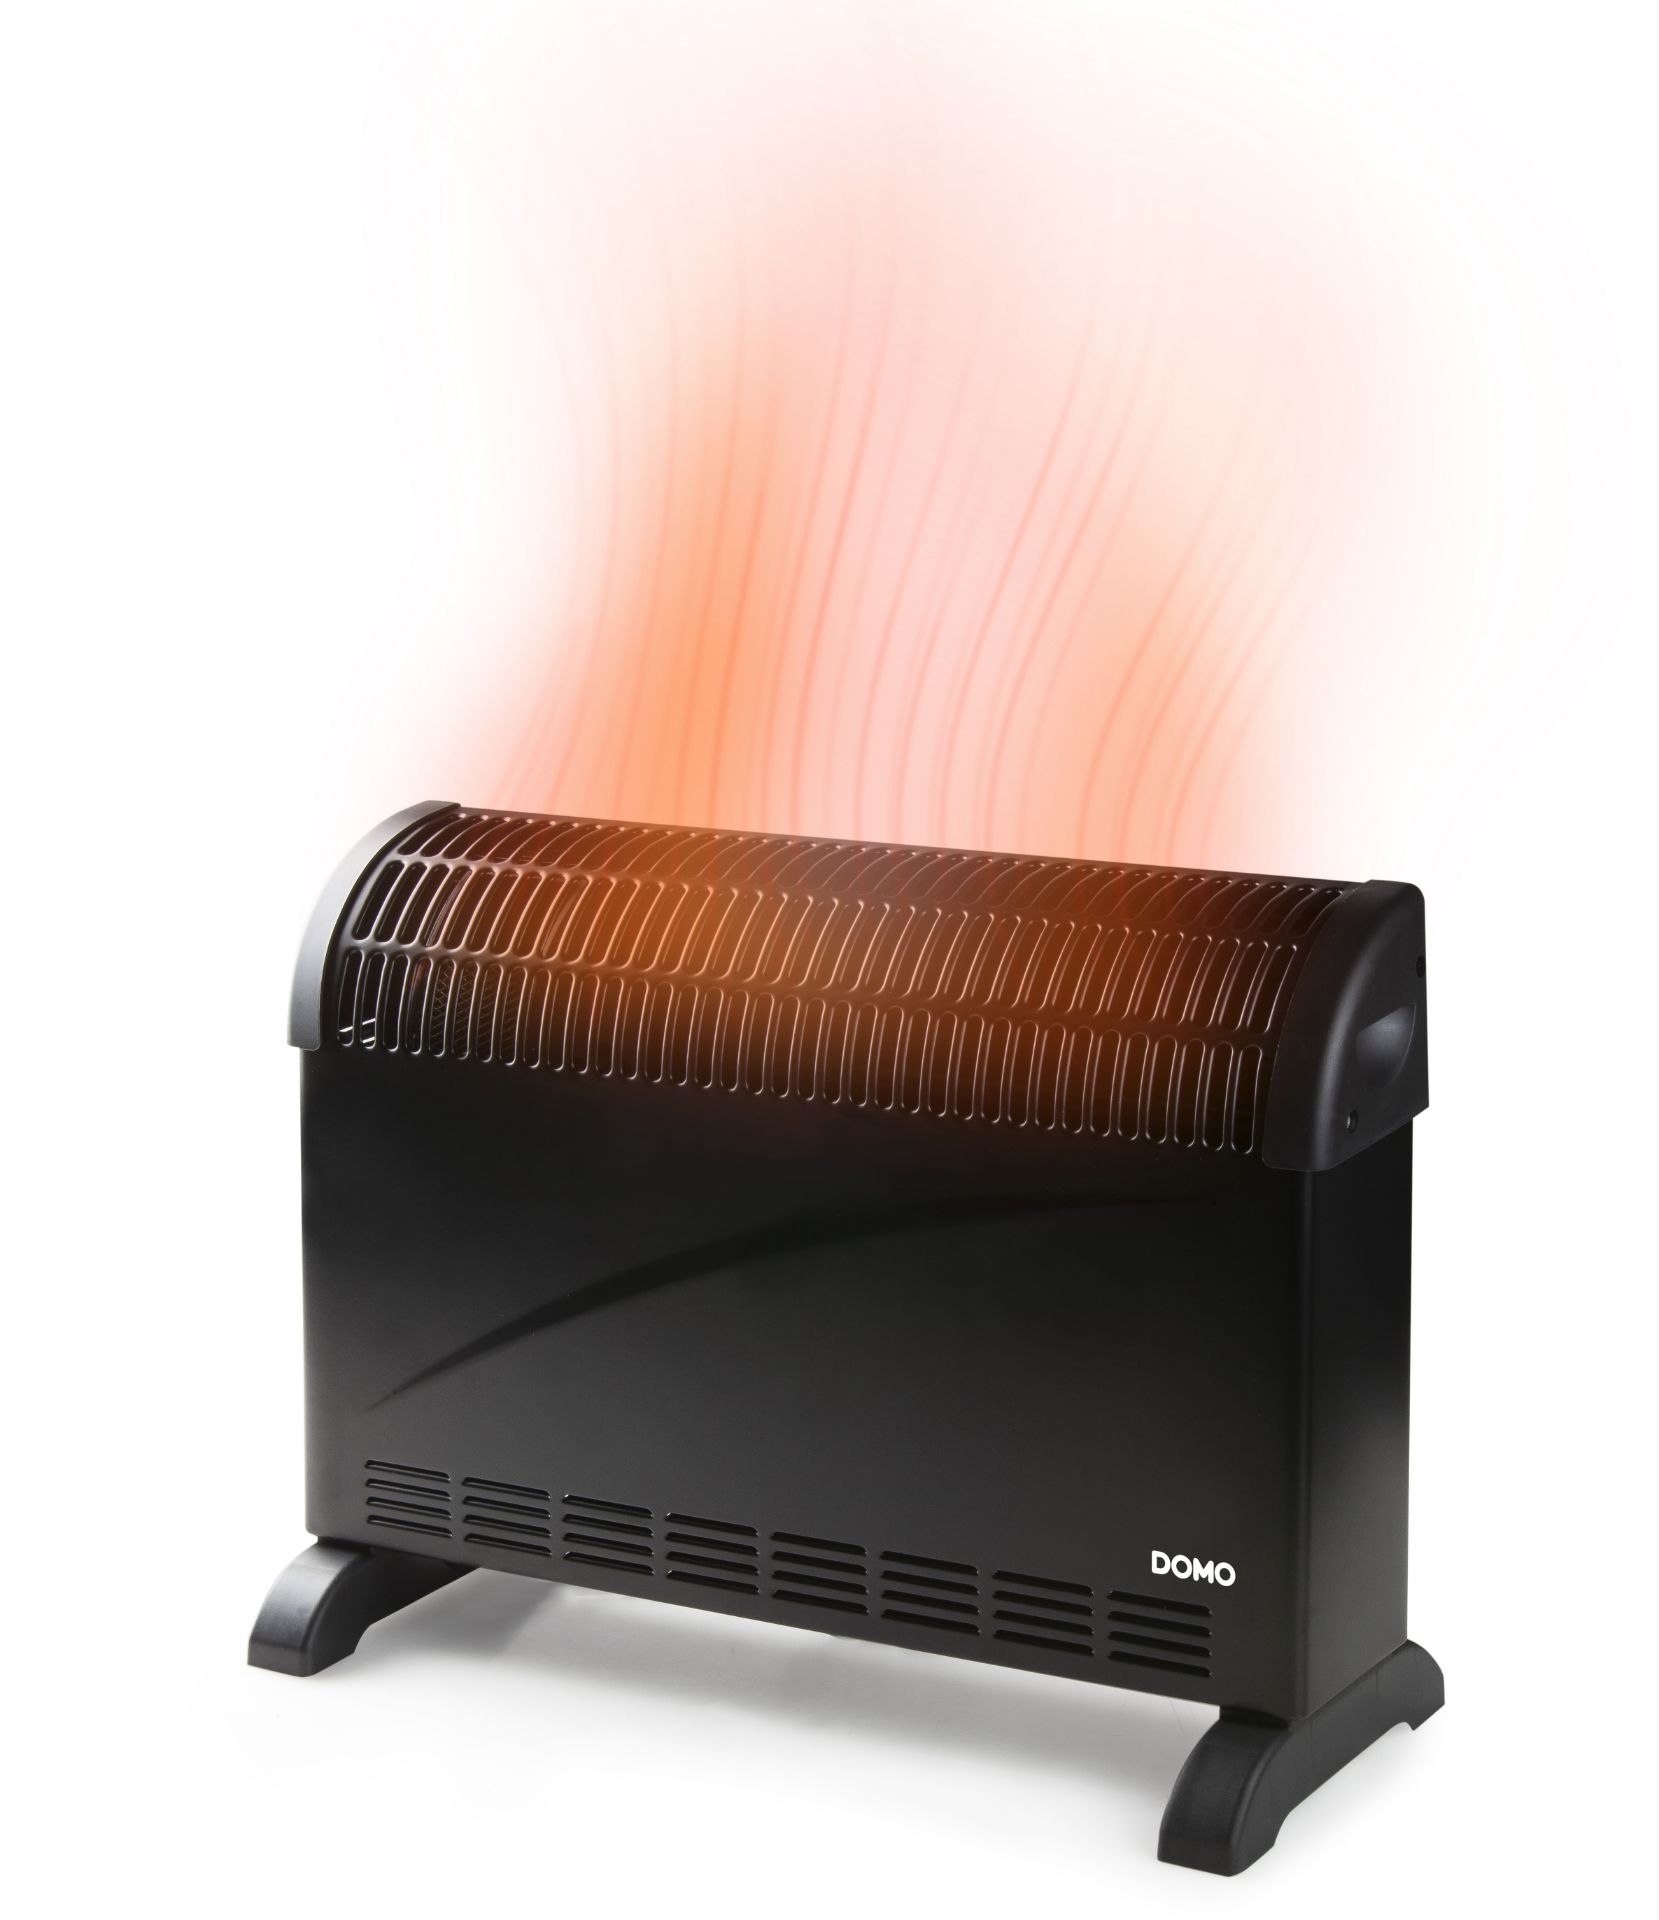 5 x DOMO Convector Heater Turbo 2000W RRP £ 55 each - Image 6 of 8